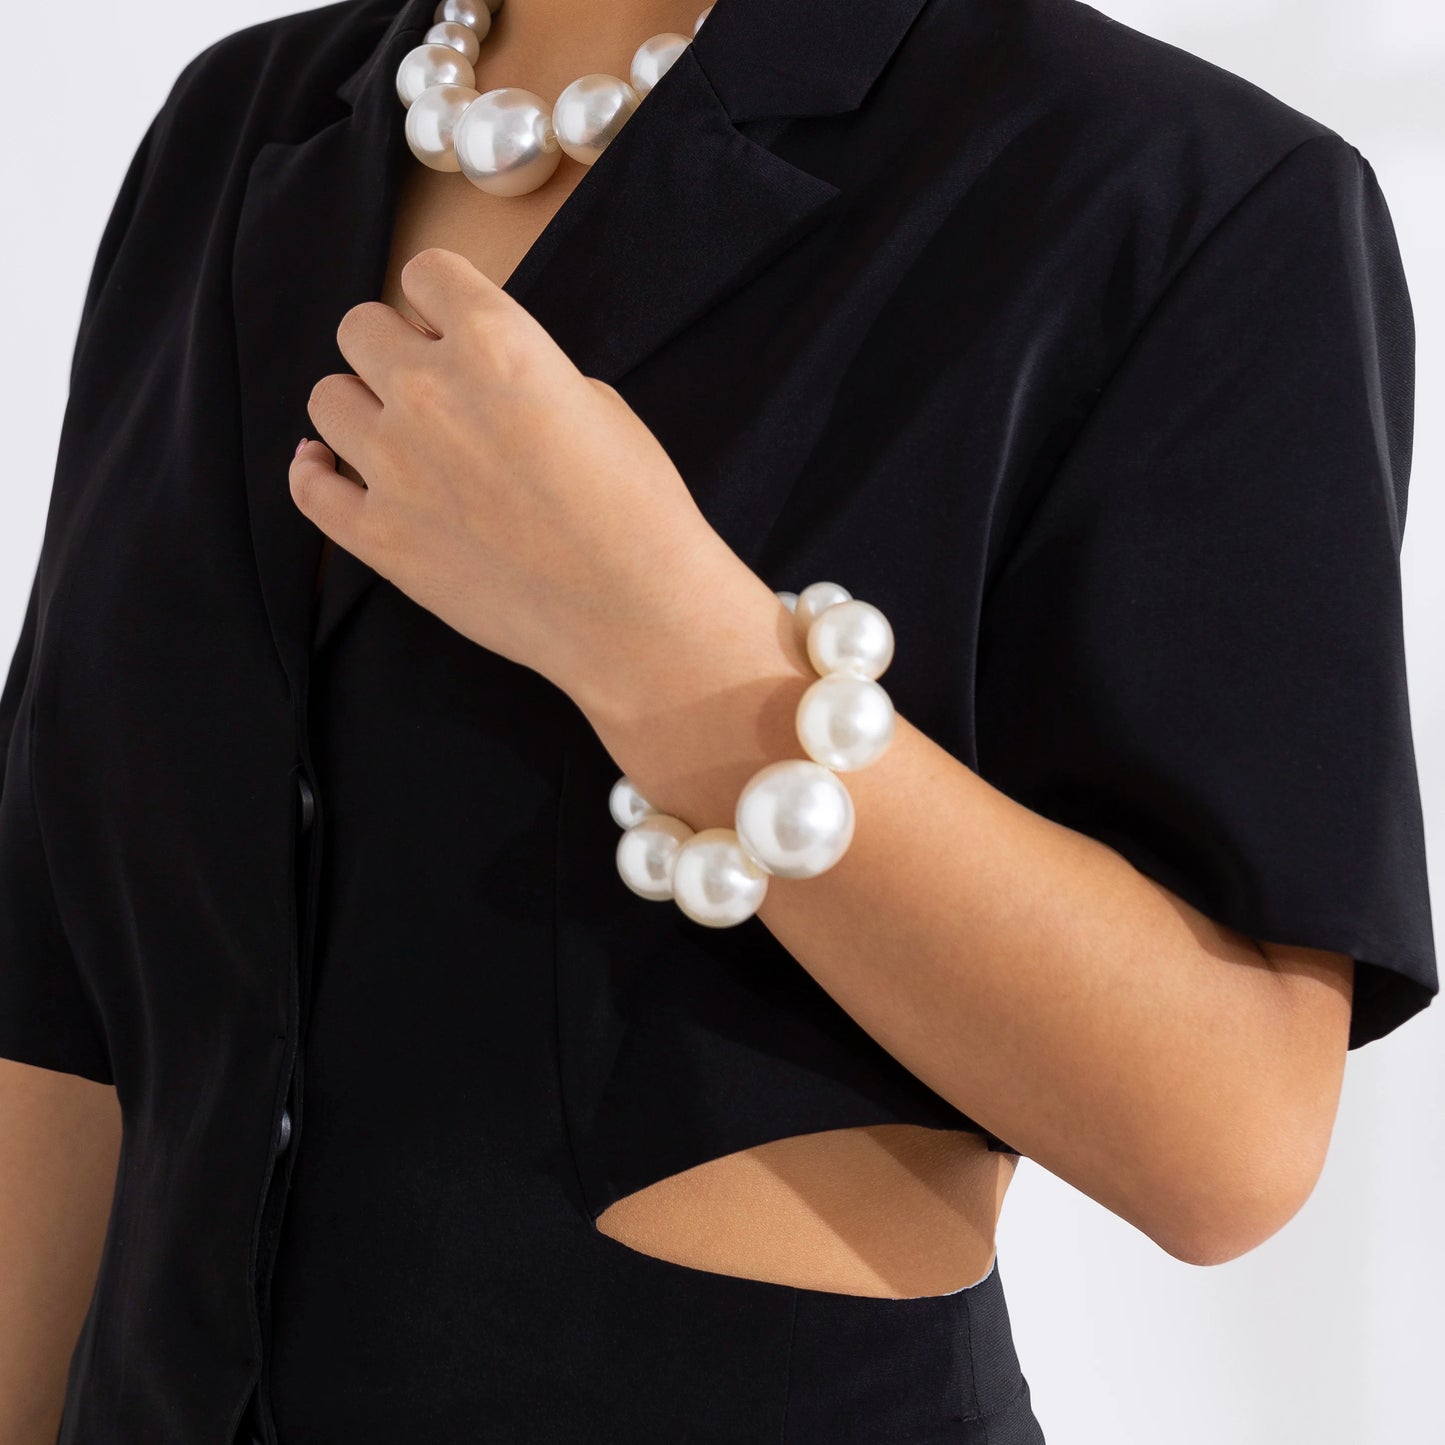 Big Imitation Pearl Choker Necklace for Women